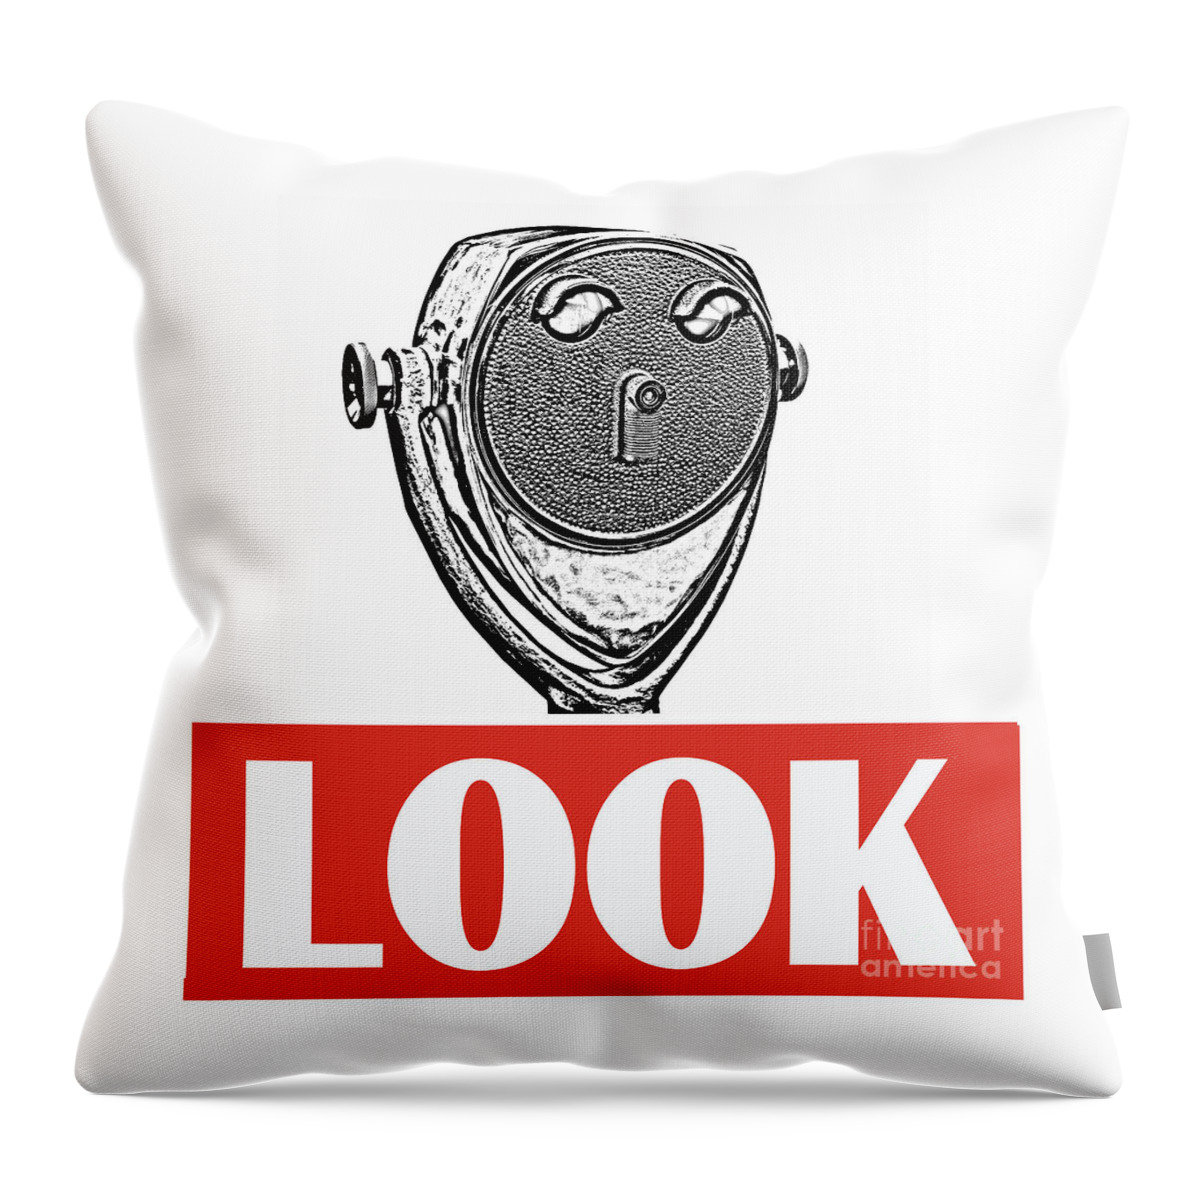 Attention Throw Pillow featuring the photograph Look by Edward Fielding